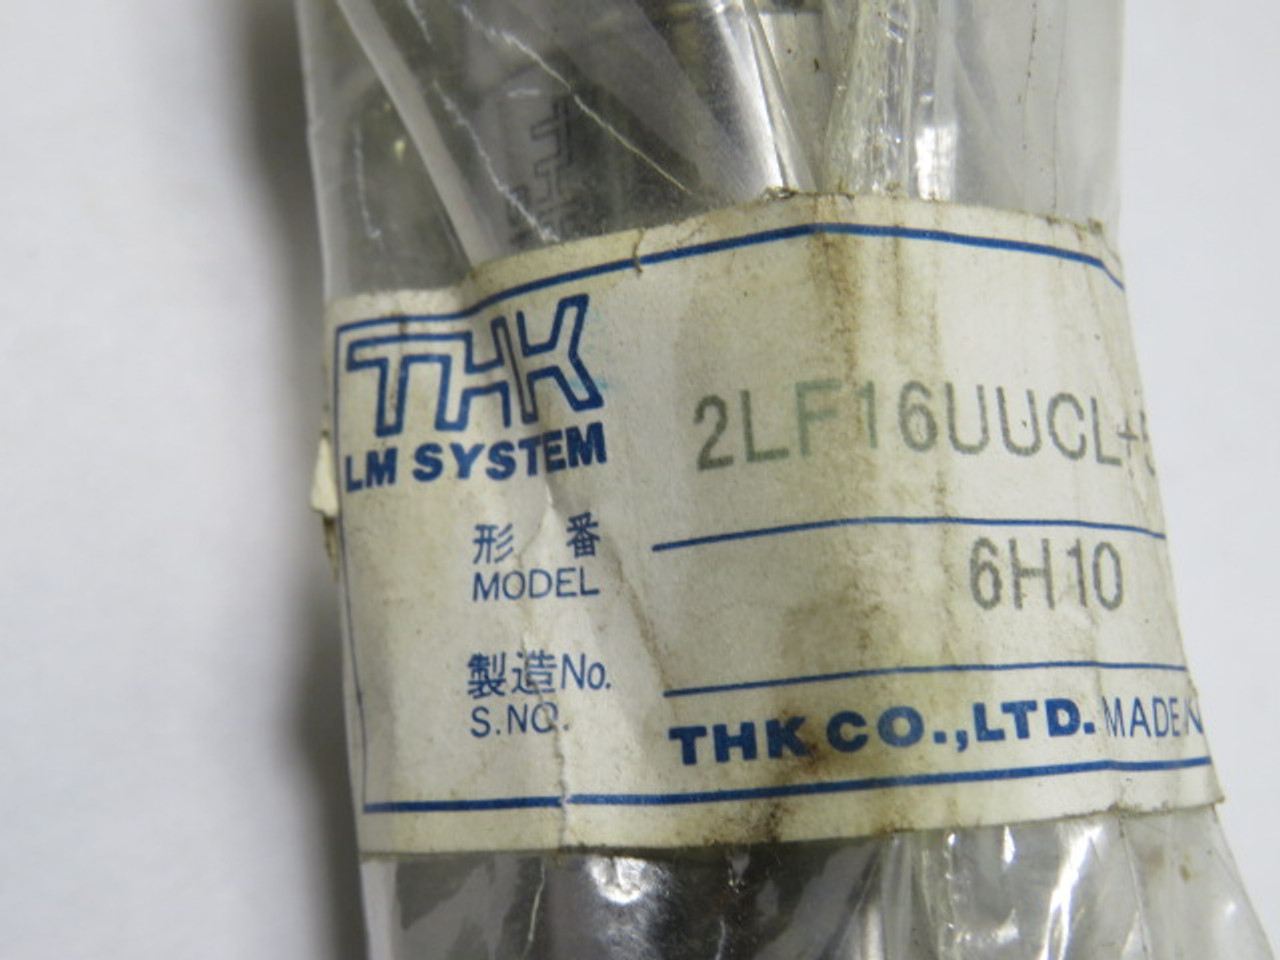 THK 2LF16UUCL+550L Linear Ball Screw 21-3/4" in Length ! NEW !